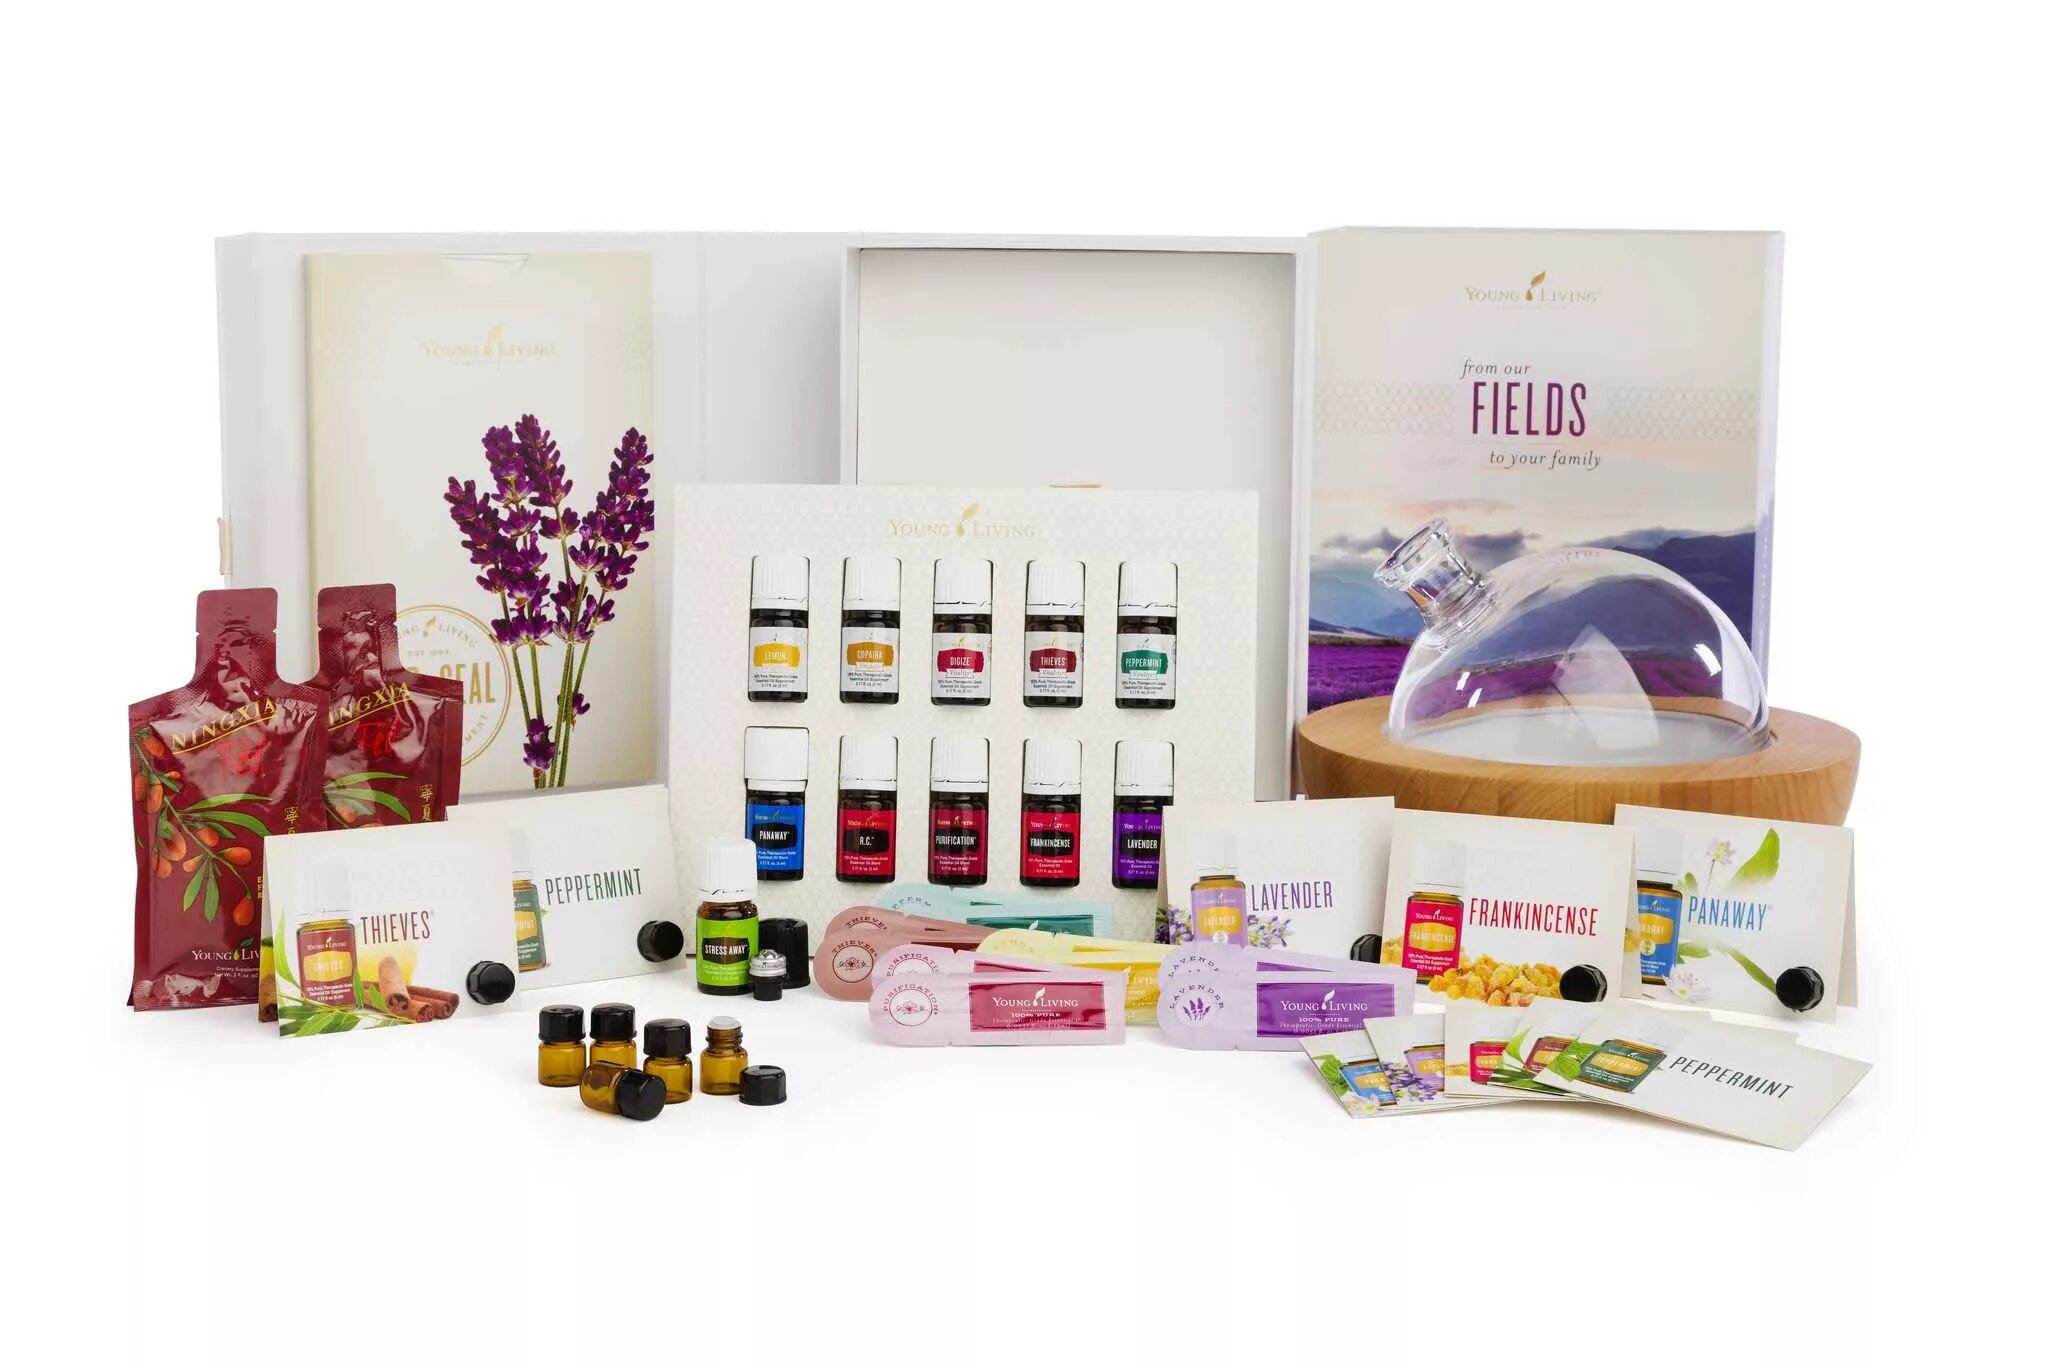 Young Living Premium Starter Kit. Young Living стартовый набор. Young Living набор масел. Young Living эфирные масла стартовый набор. Набор starter kit